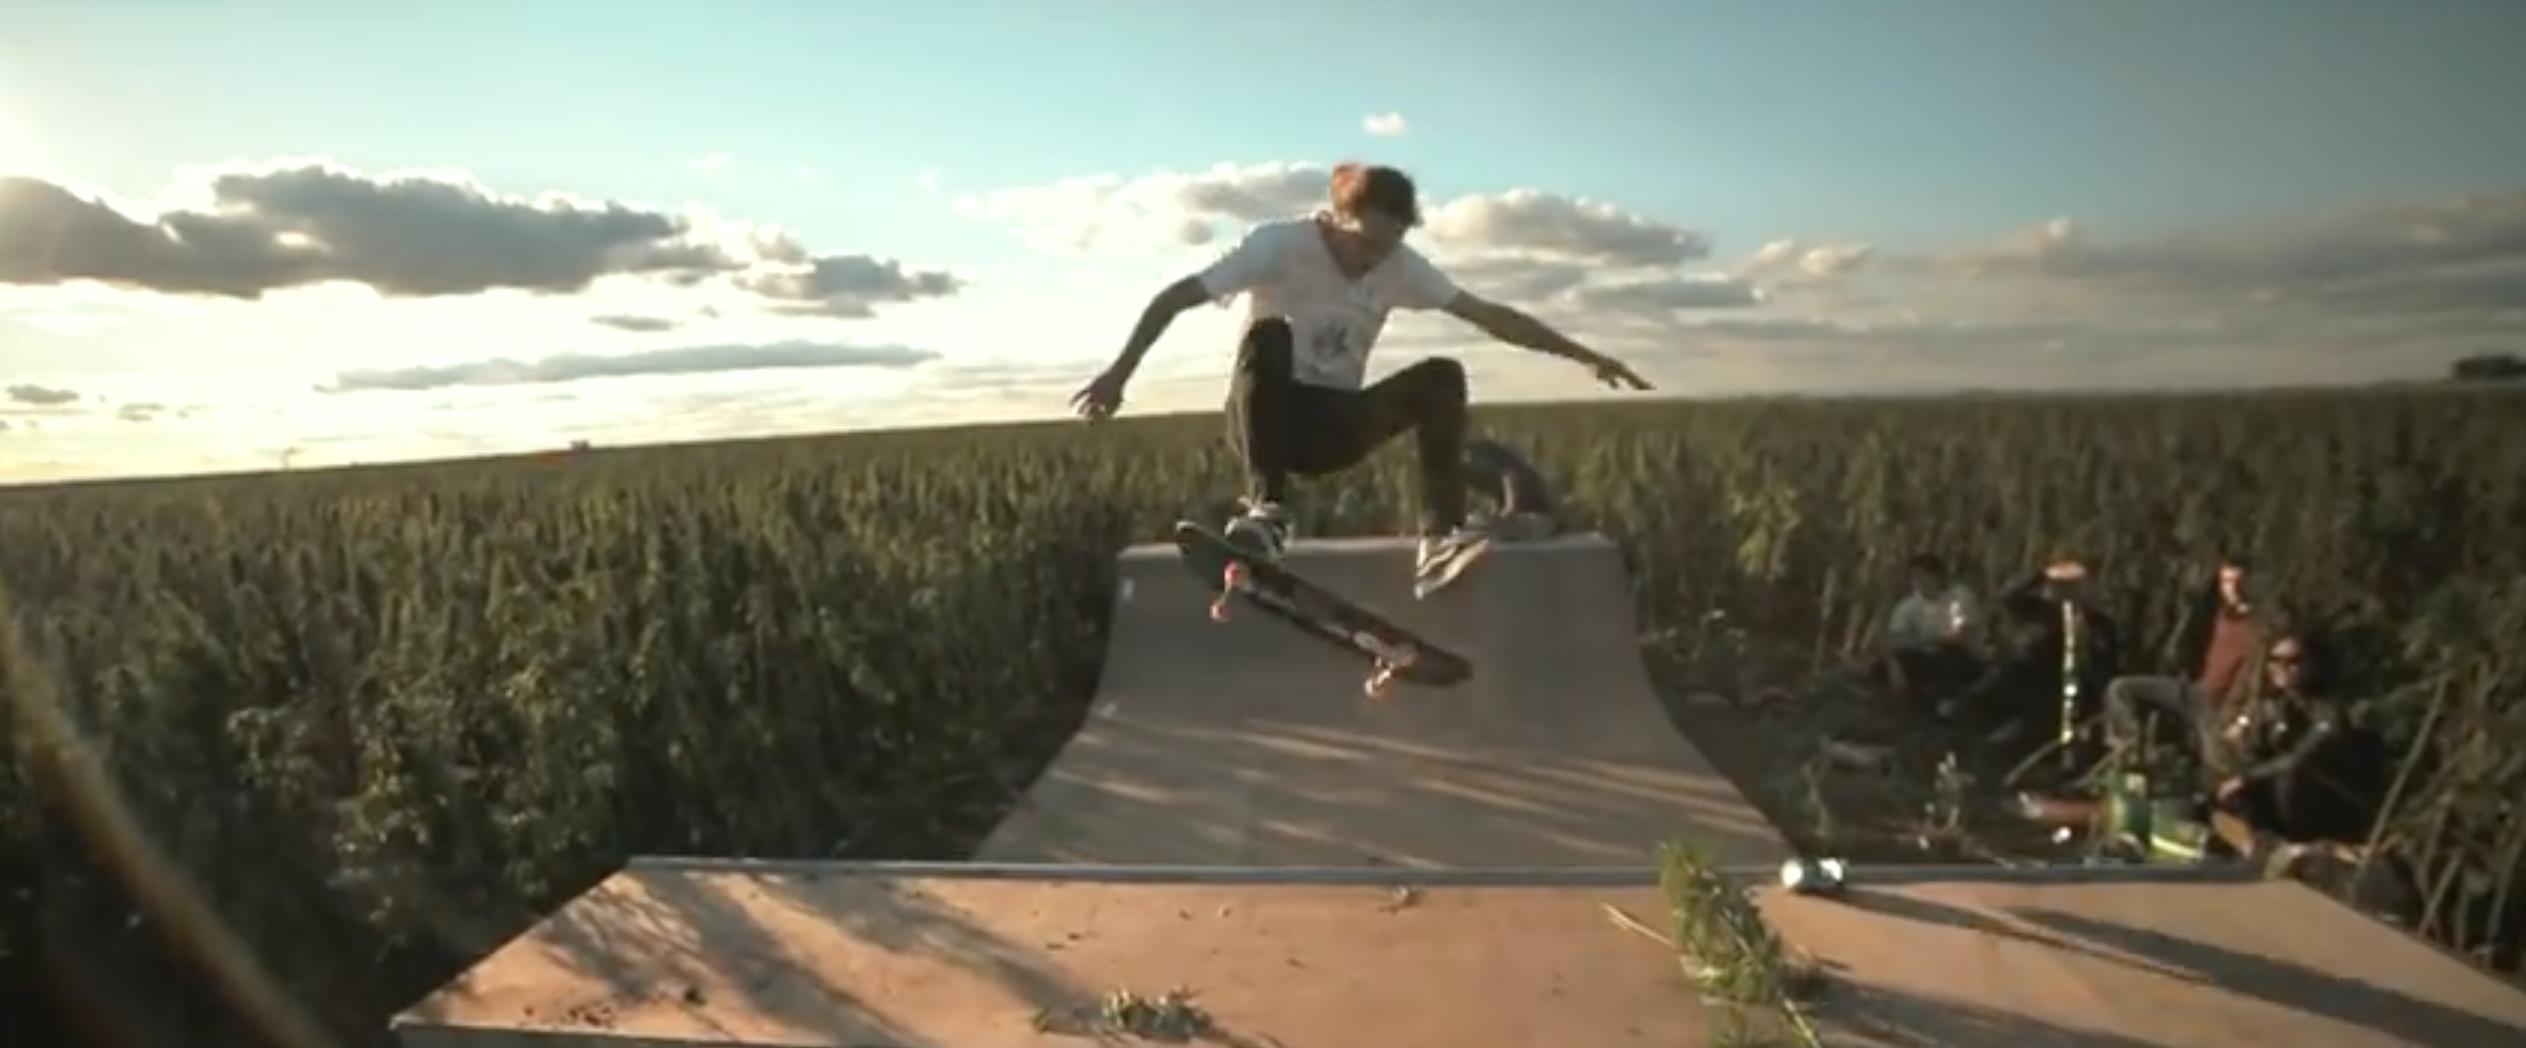 WATCH: These Guys Built A Half Pipe In The Middle Of A Sea Of Weed